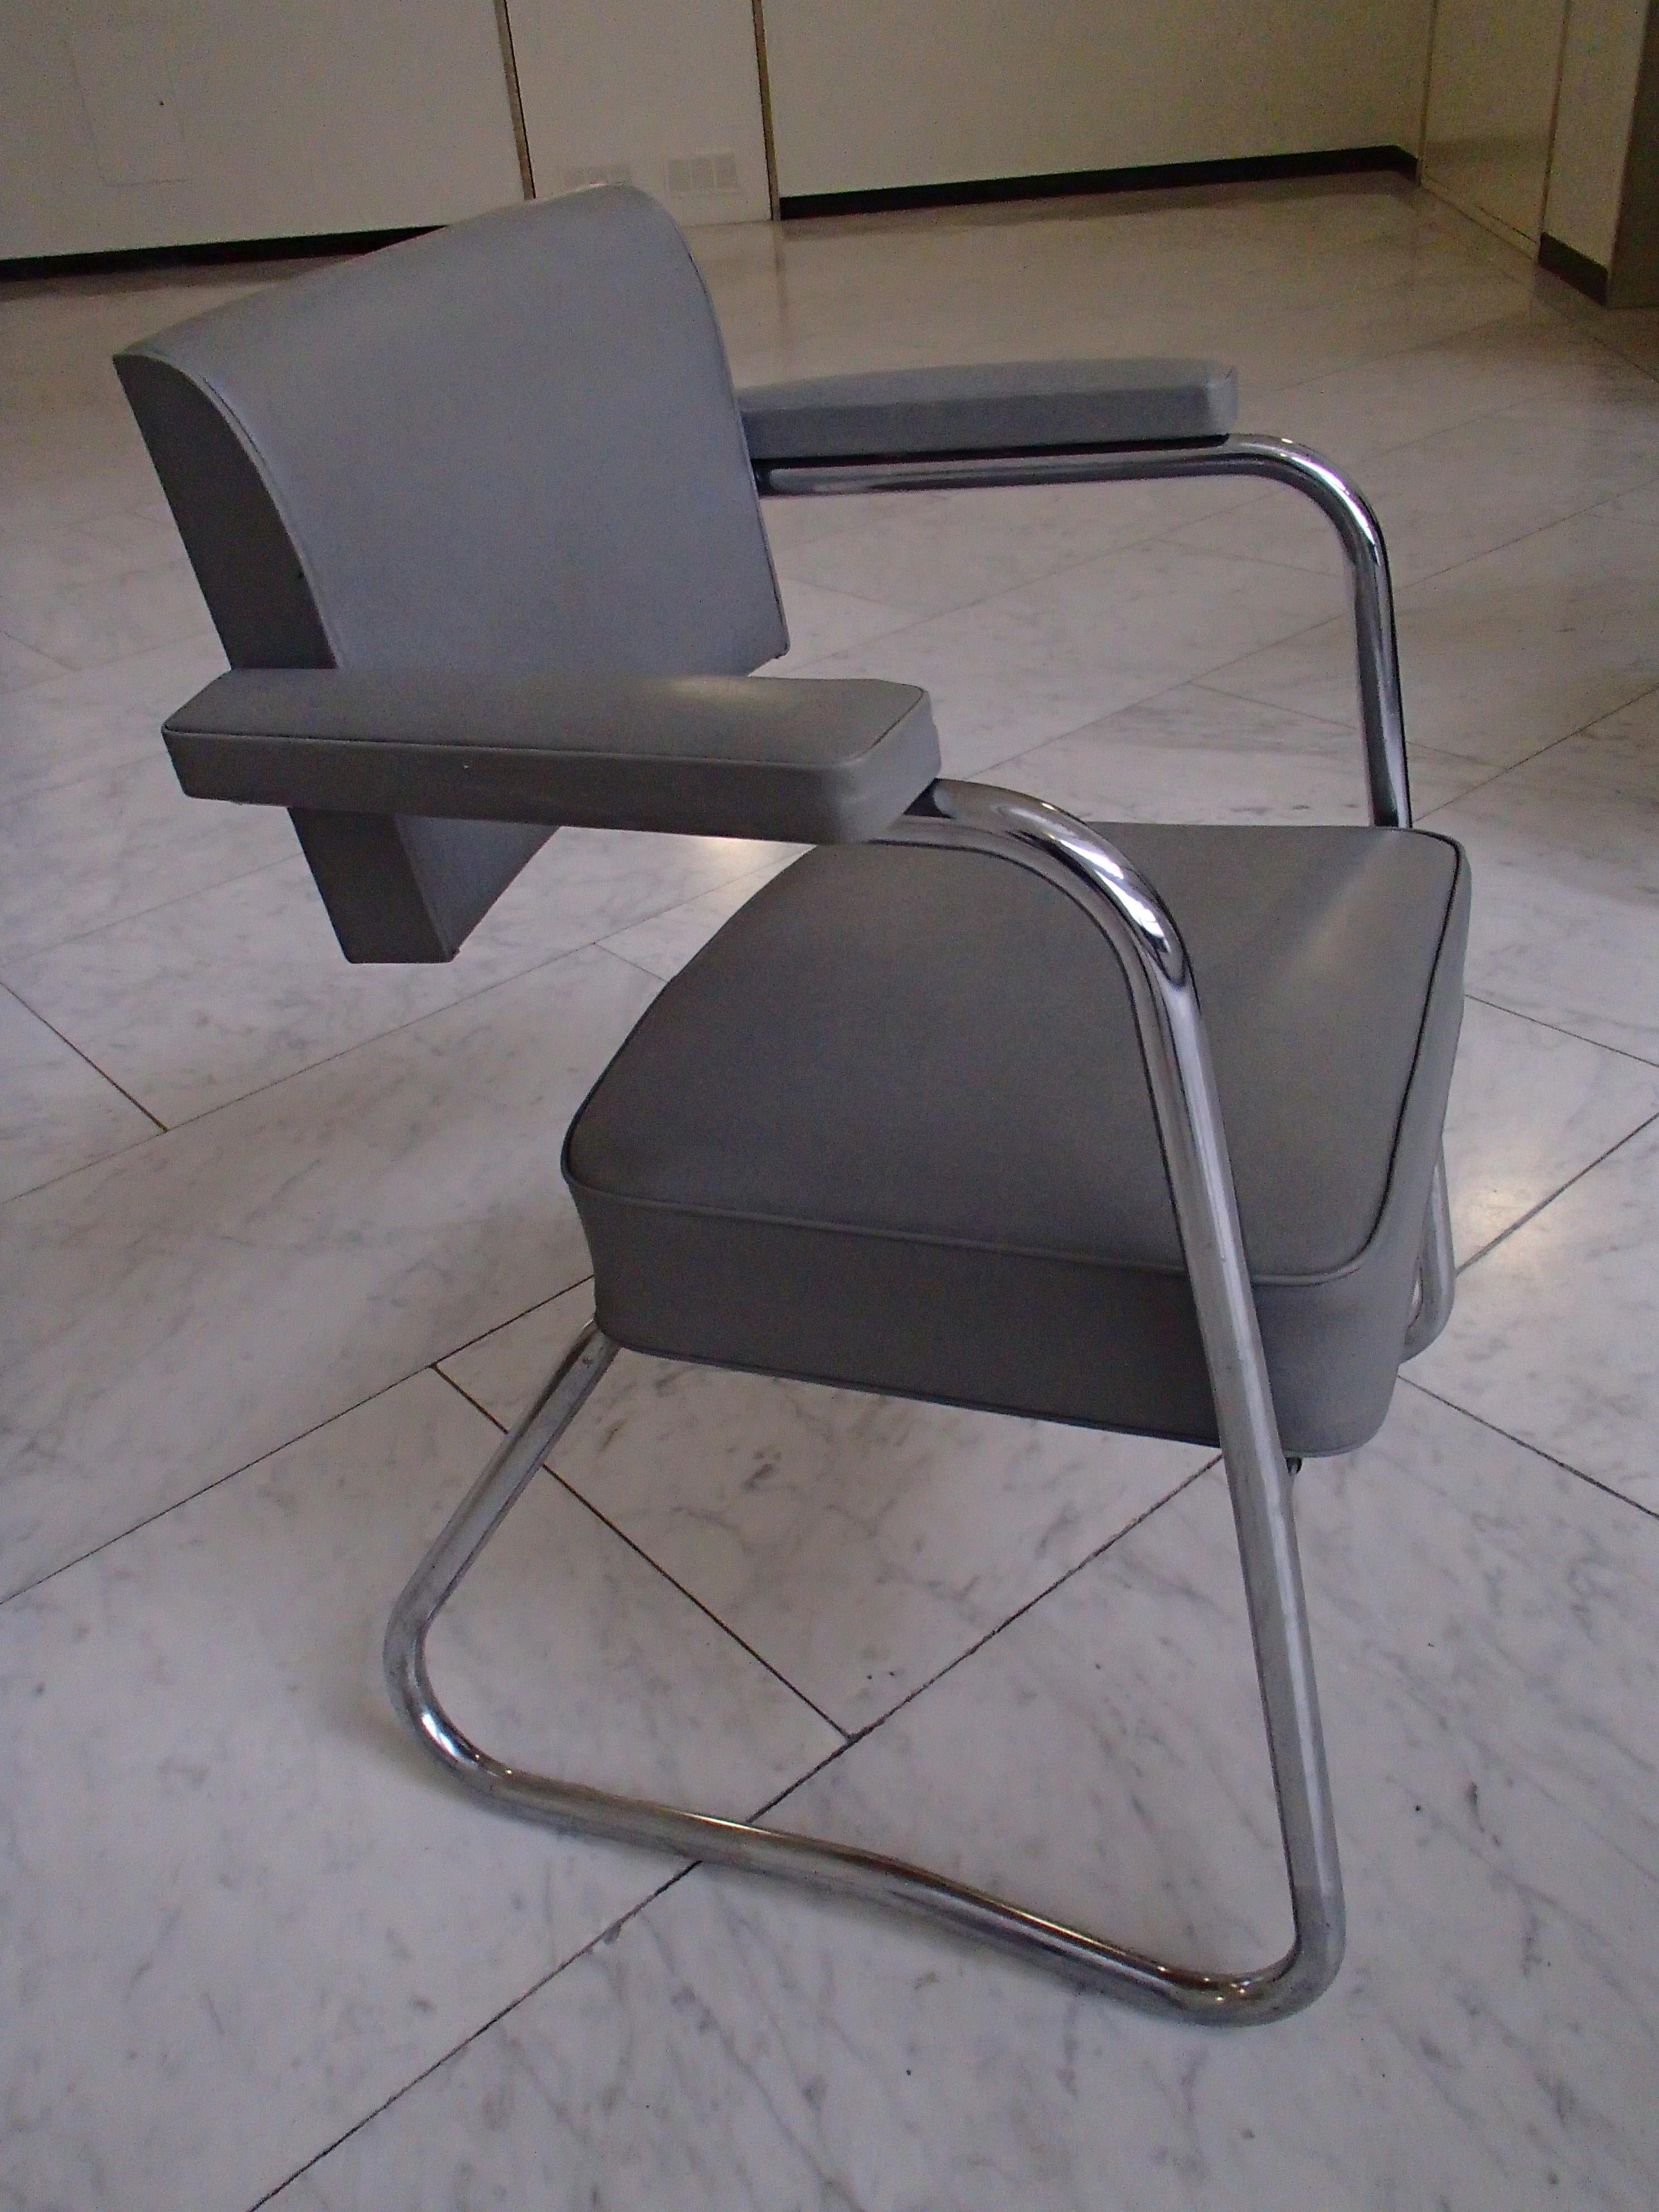 Pair of industrial Bauhaus armchairs chrome and grey leatherette.